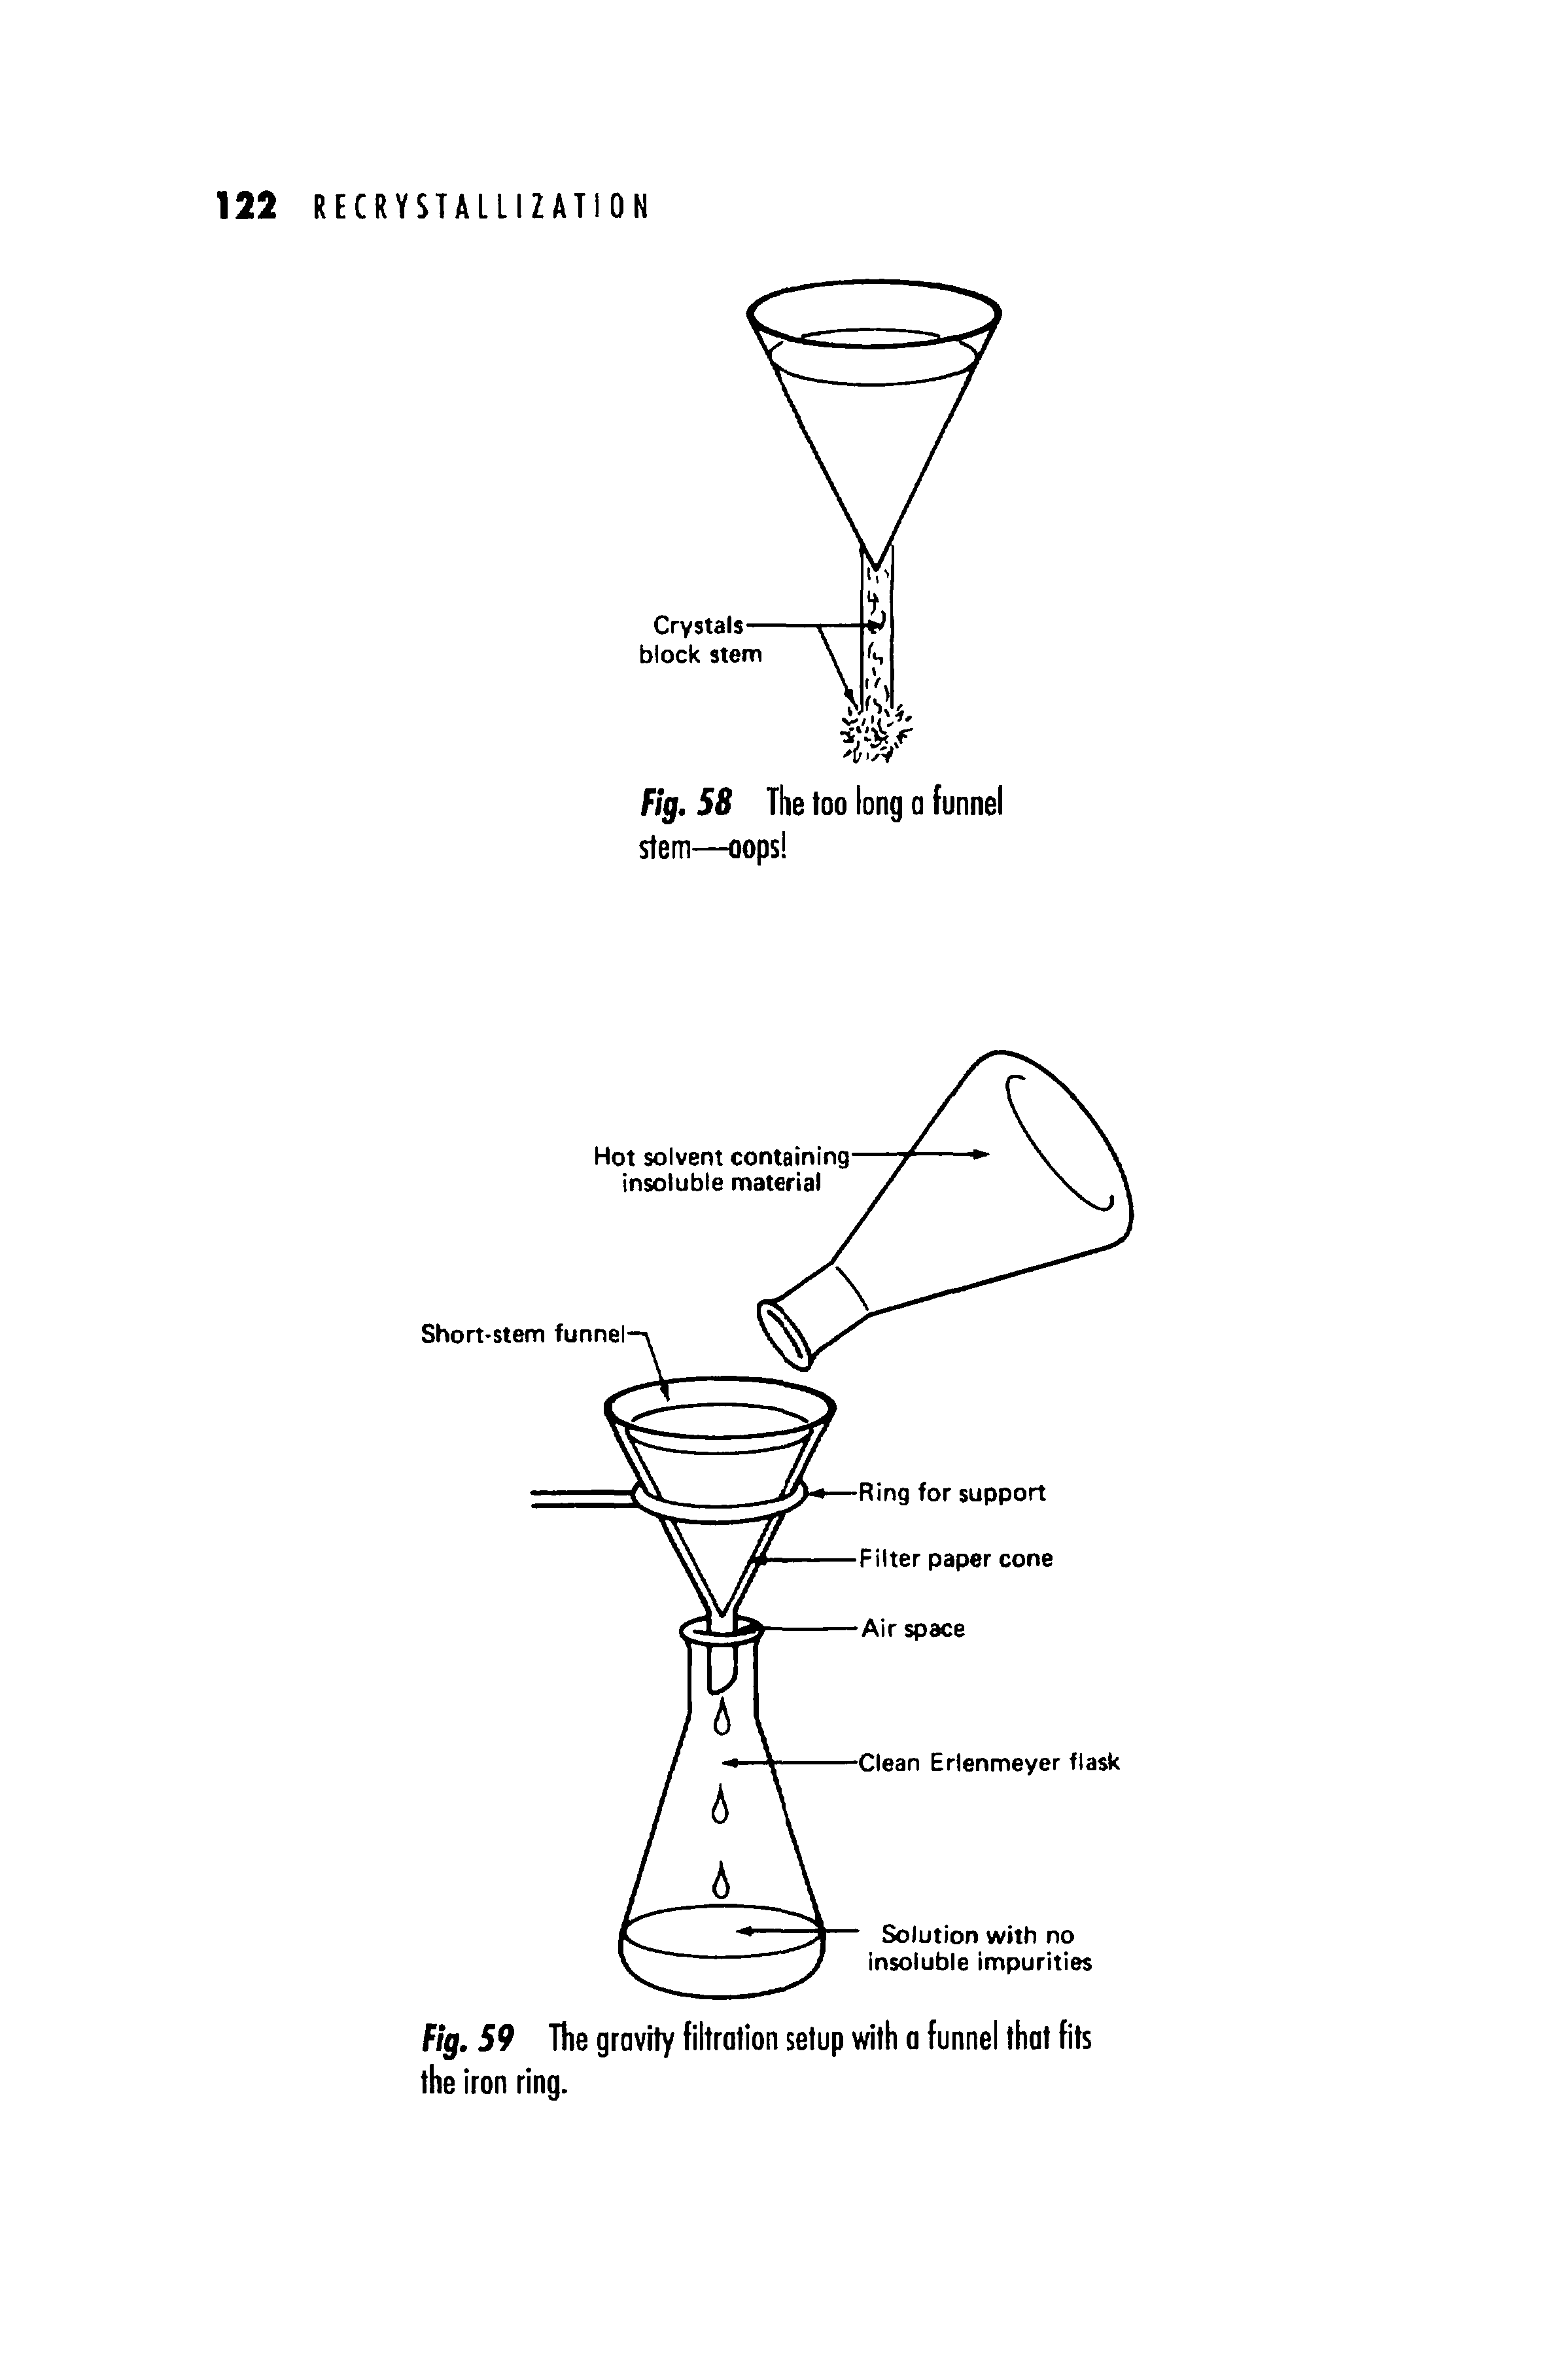 Fig. 59 The gravity filtration setup with a funnel that fits the iron ring.